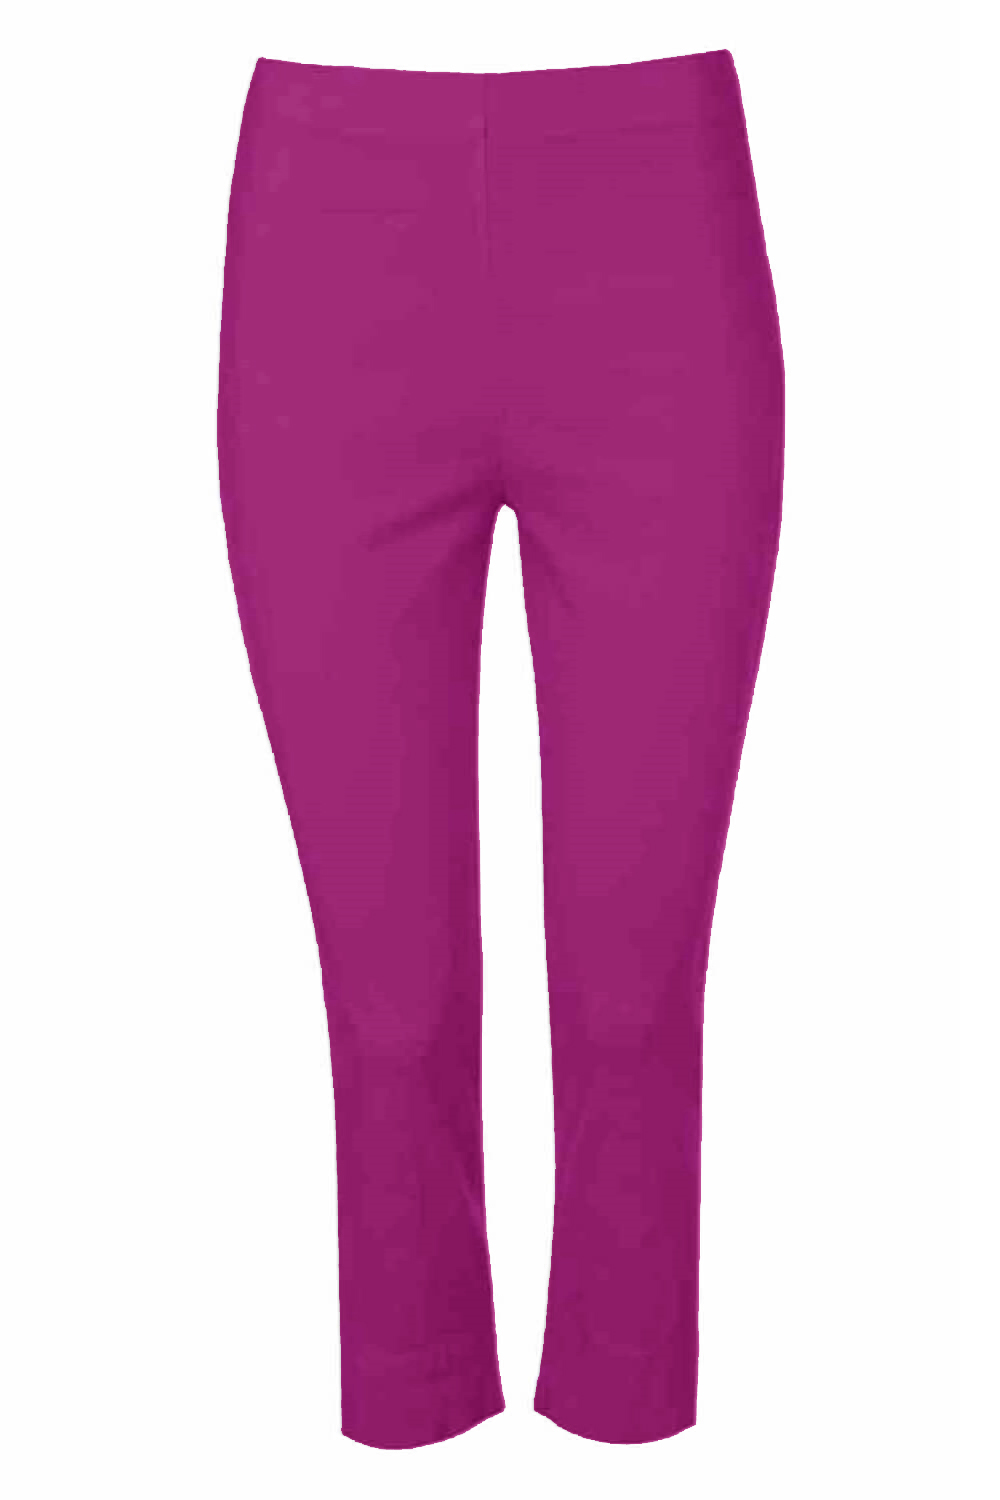 MAGENTA Cropped Stretch Trouser, Image 4 of 6